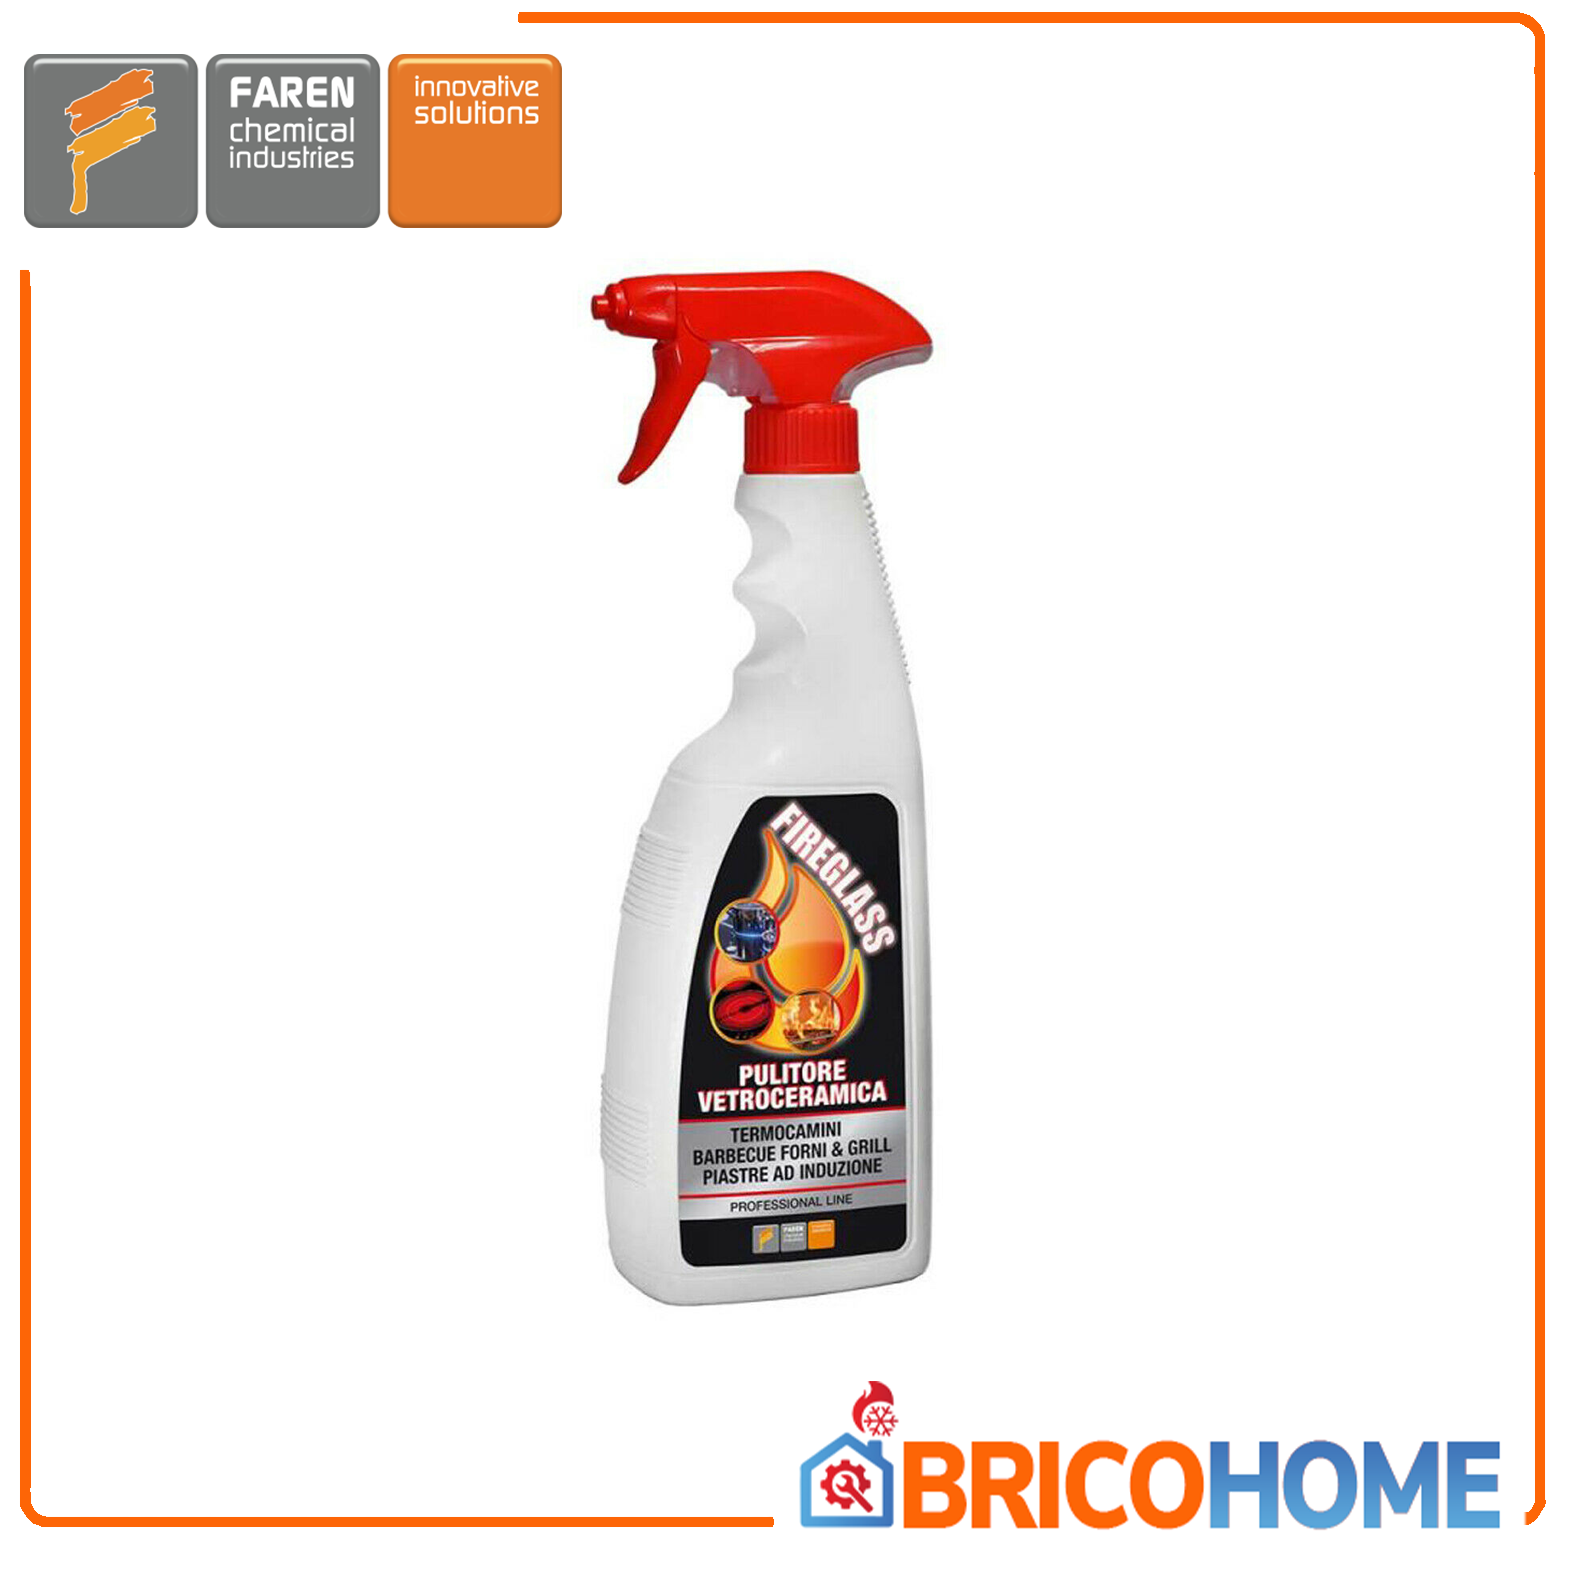 Fireplace and barbecue glass ceramic cleaner 750 ML FIREGLASS FAREN